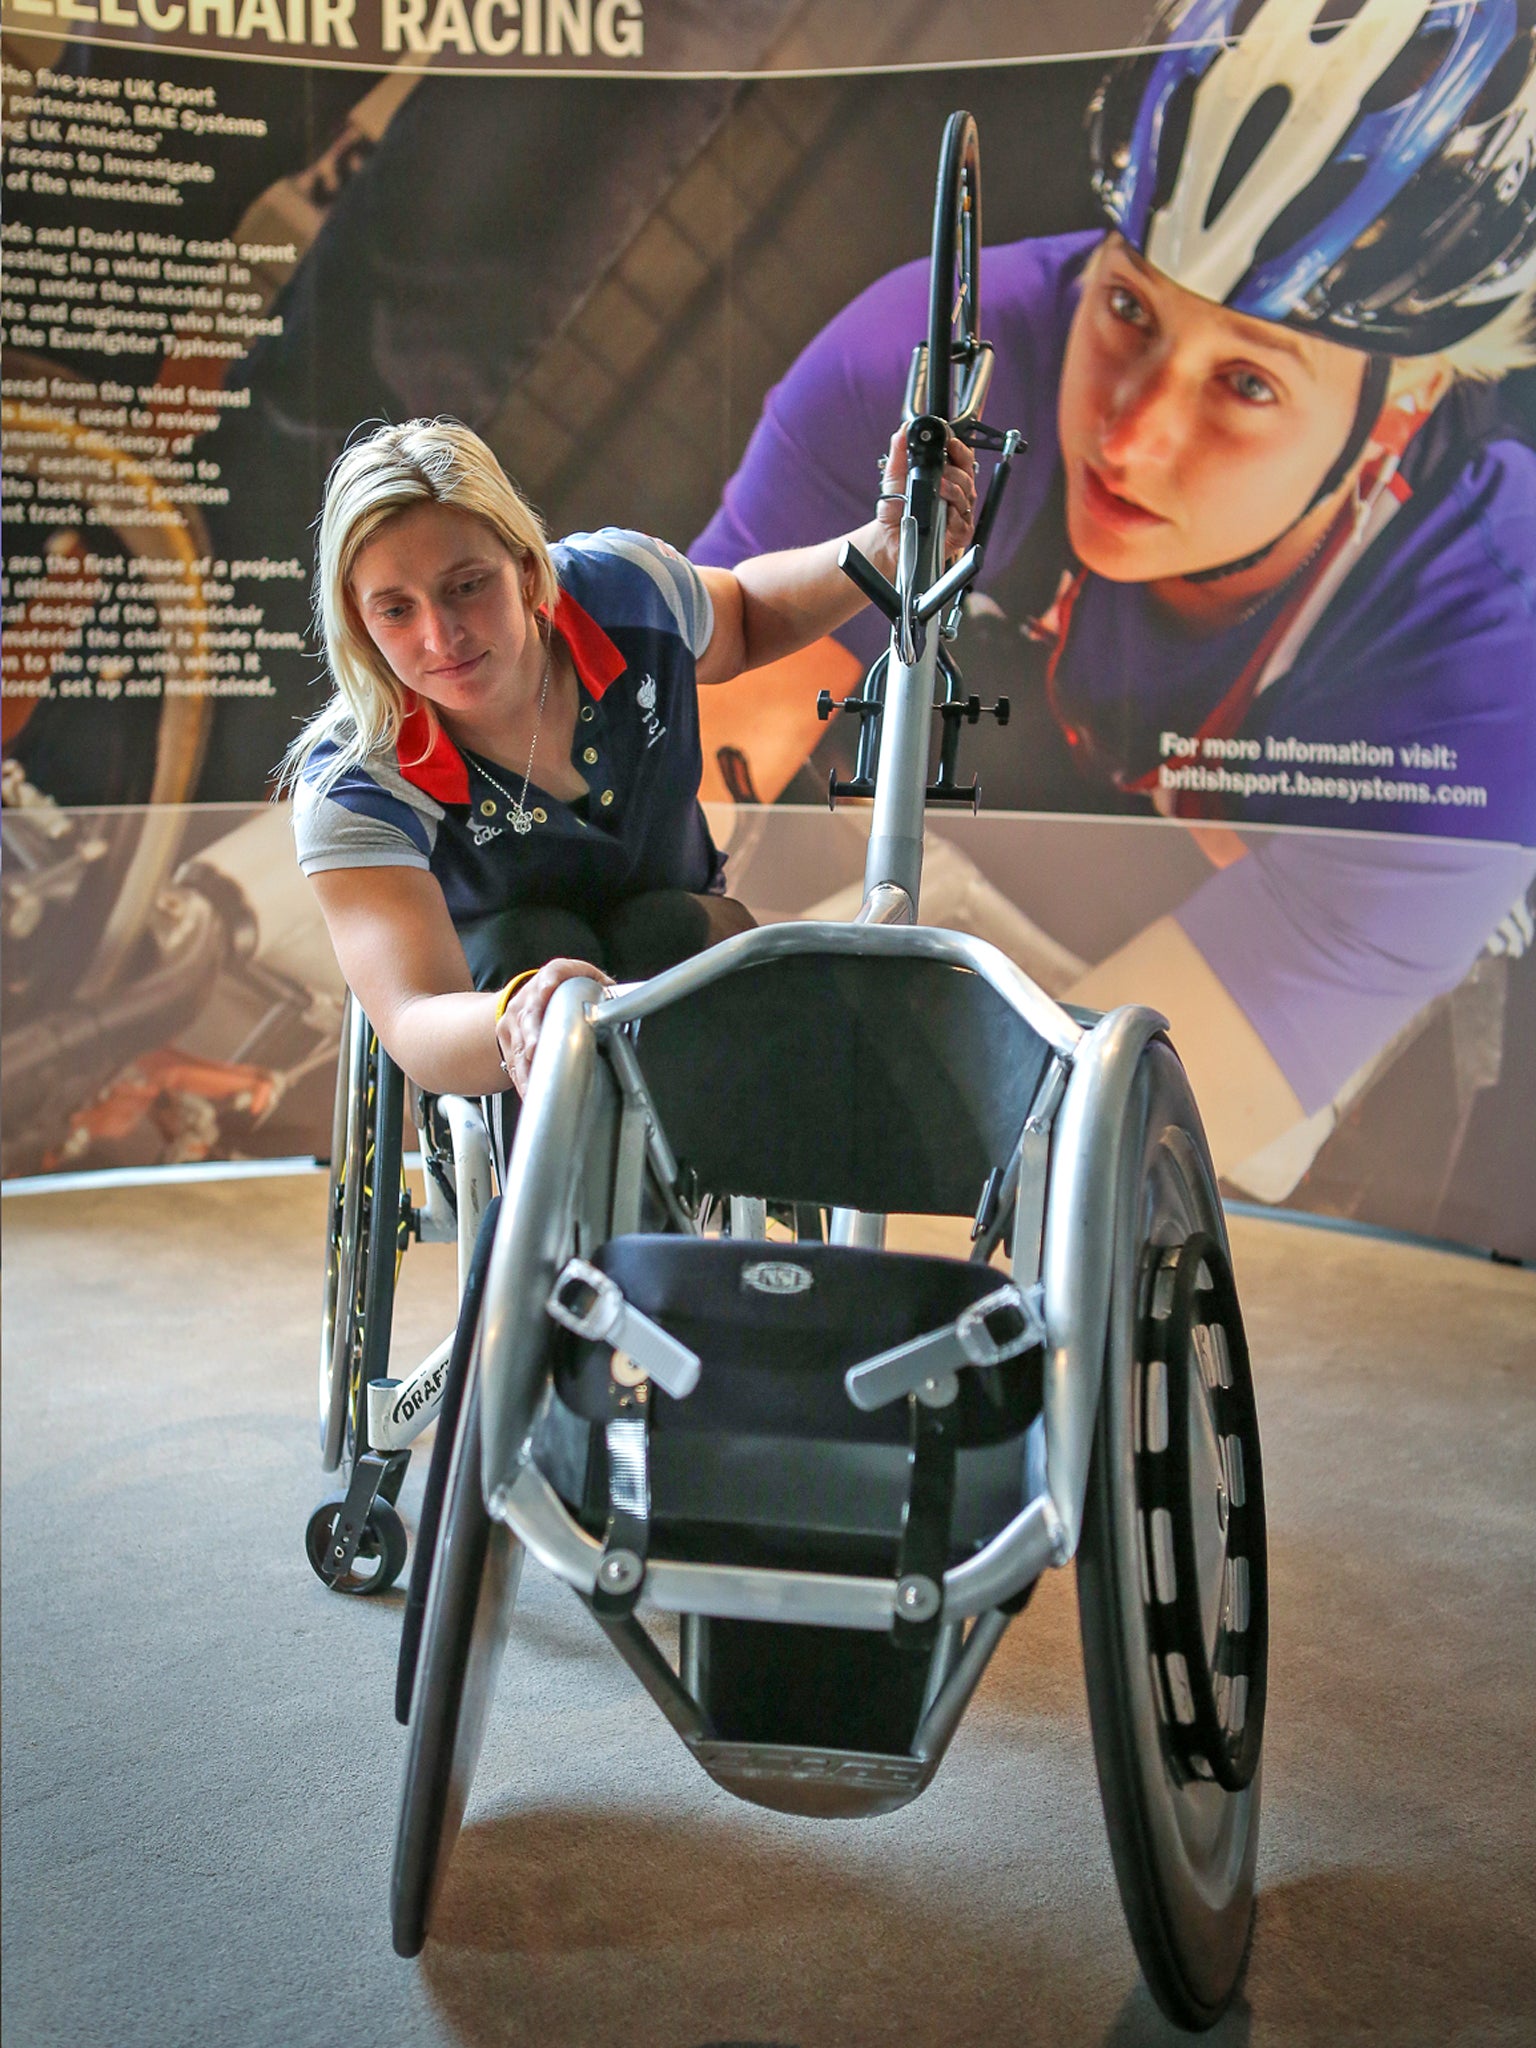 Paralympic medallist Shelly Woods unveils a revolutionary new wheel on her chair